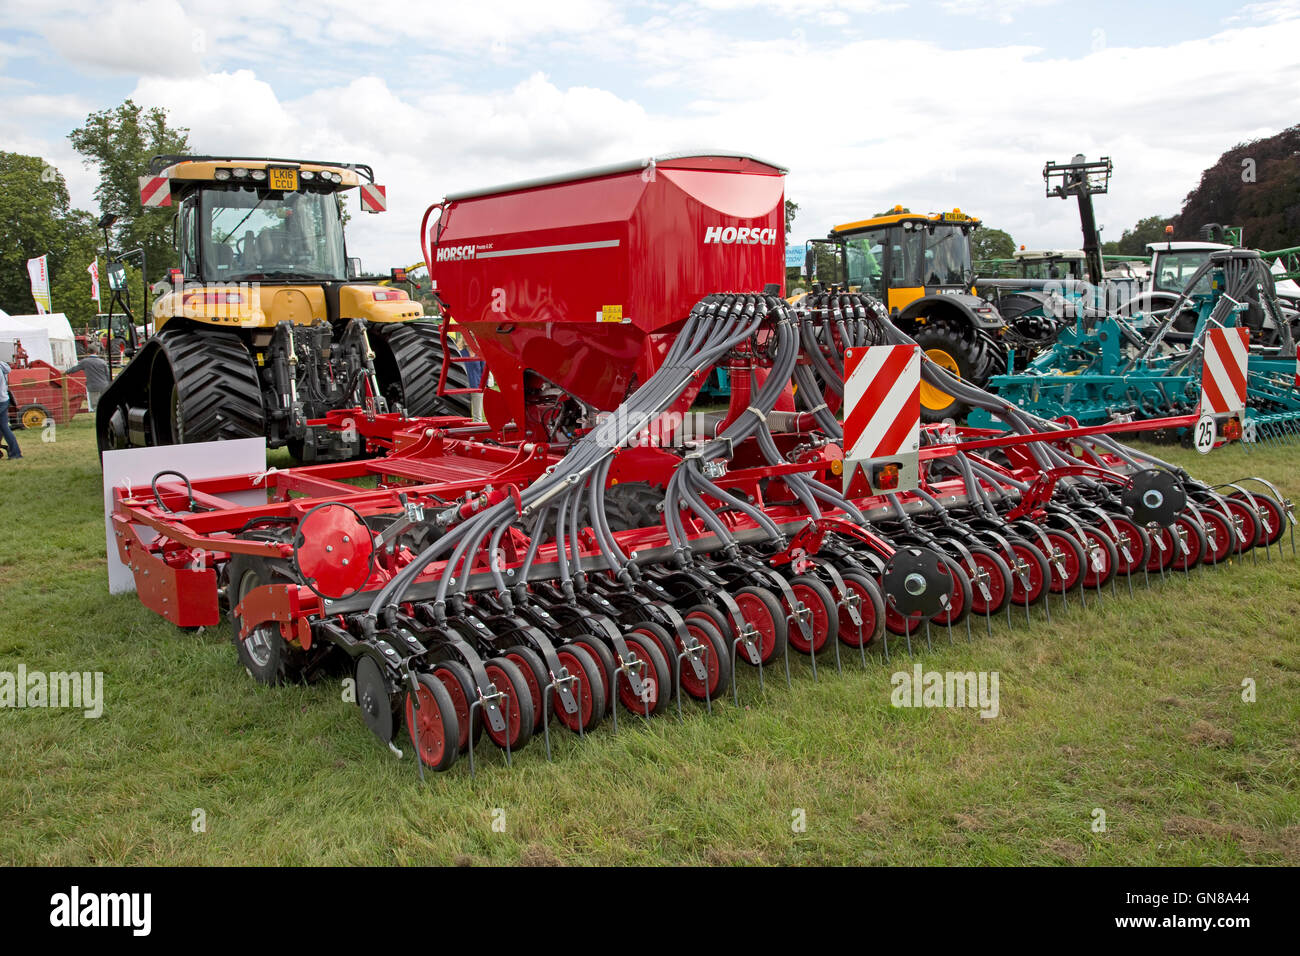 Red Horsch Pronto 6 DC cultivator drill on display at Countryfile Live Blenheim UK Stock Photo